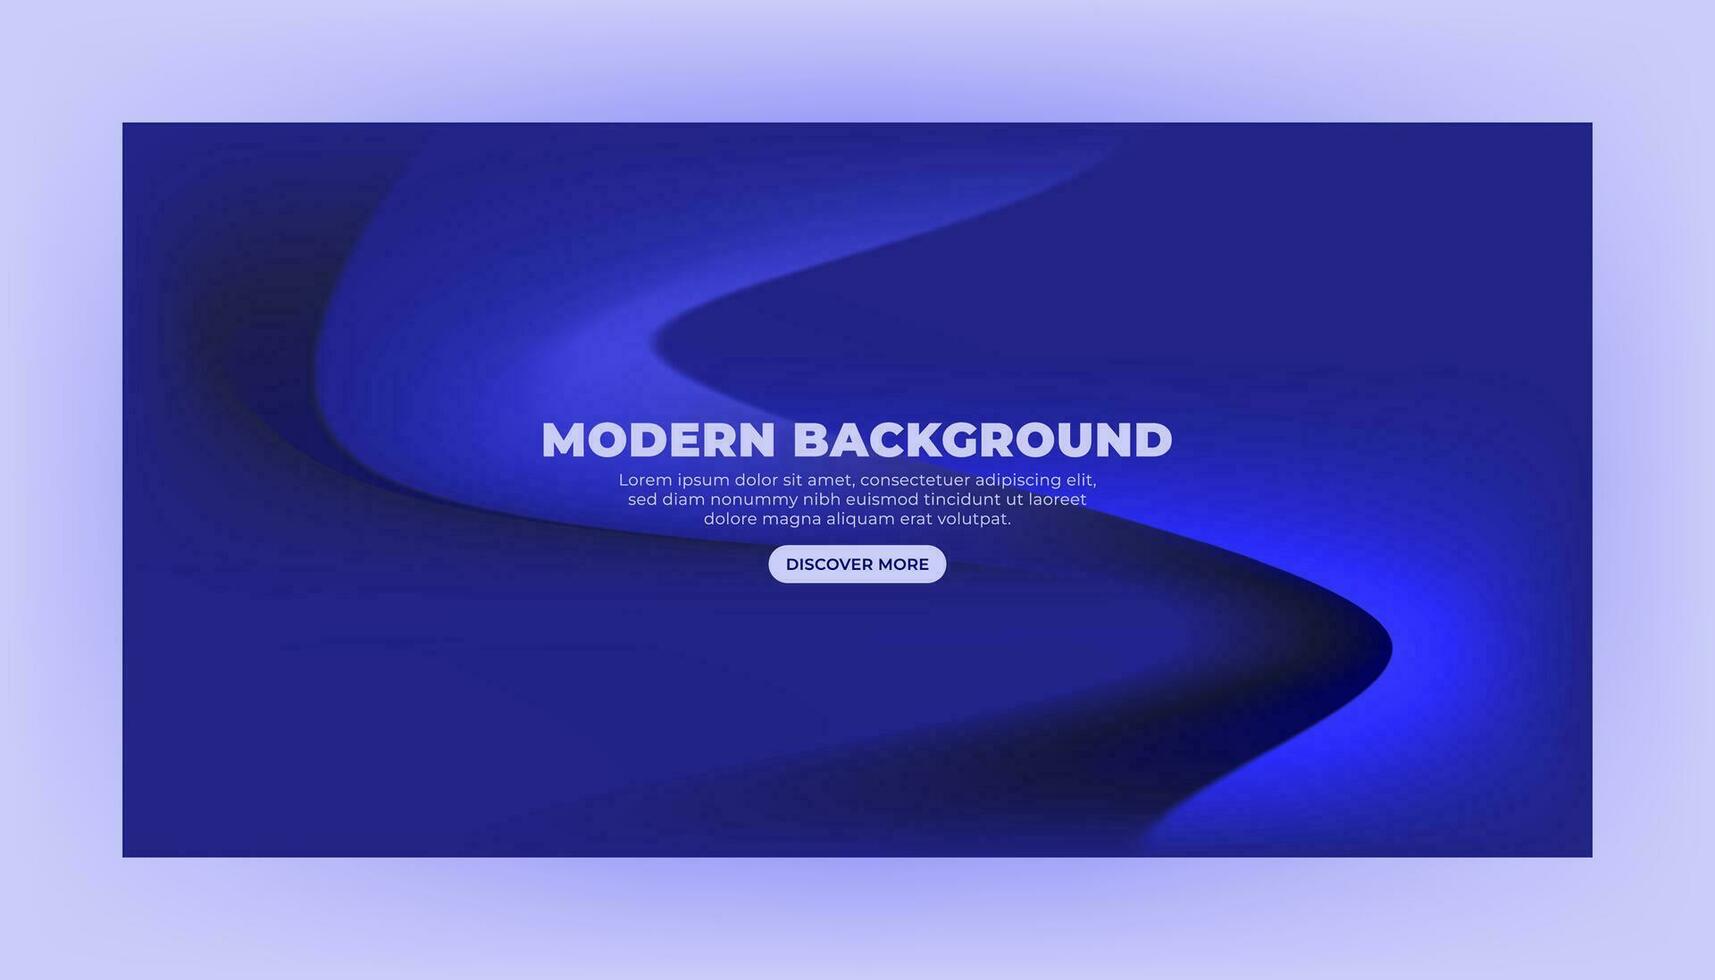 Modern Background Design with Gradient and Minimalist Gradient Background with geometric shapes for Website design, landing page, wallpaper, banner, poster, flyer, and presentation vector